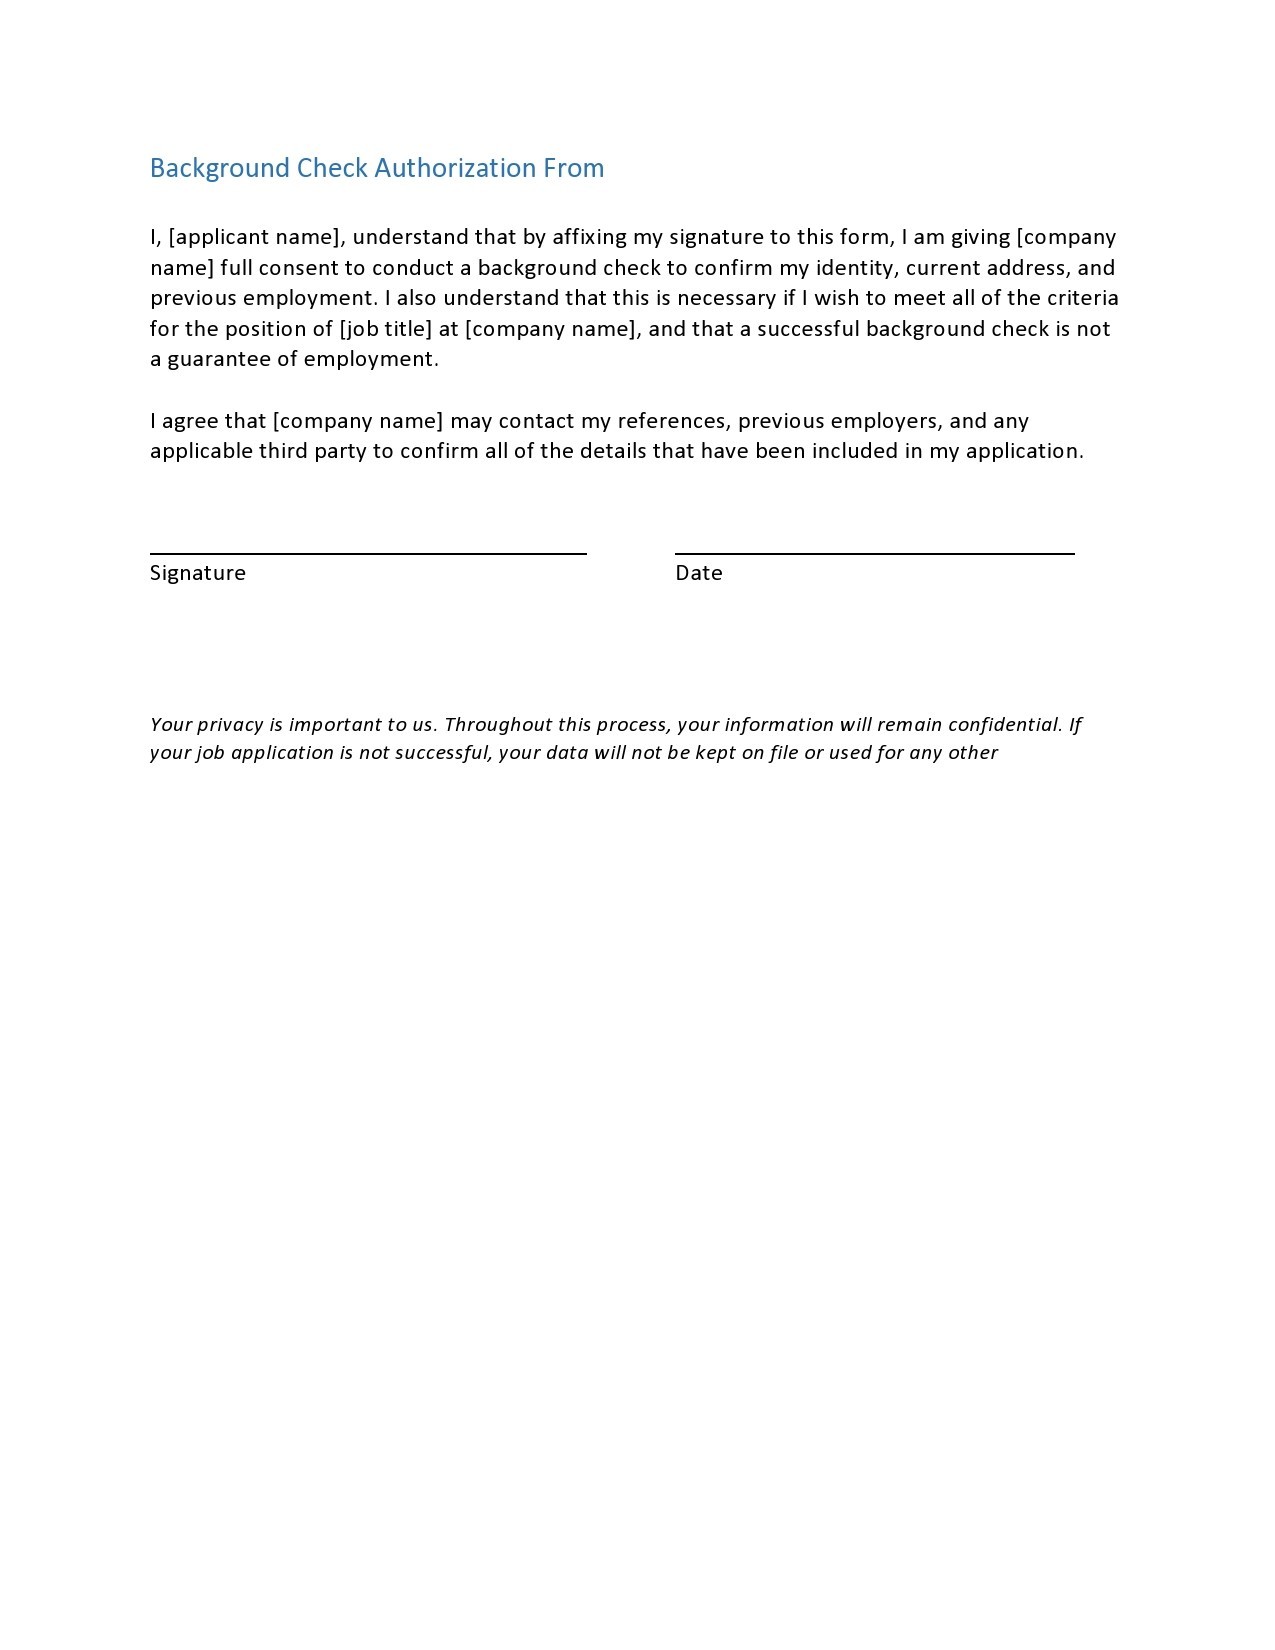 Free background check form 24